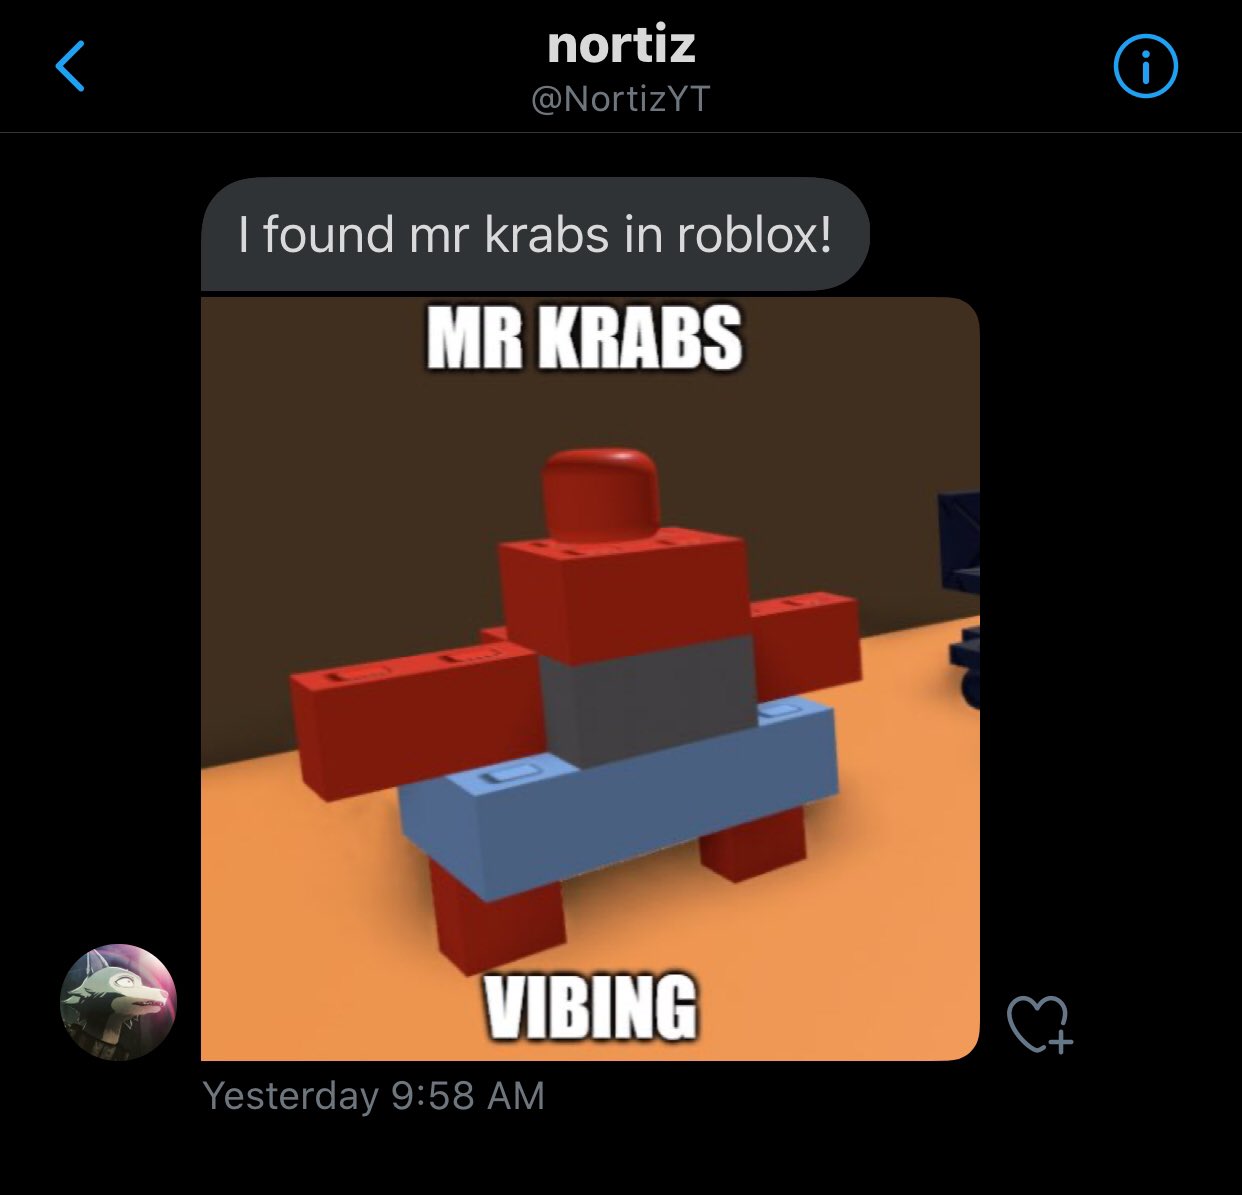 News Roblox On Twitter Mr Crabs Has Been Spotted In A Roblox - roblox mr krabbs